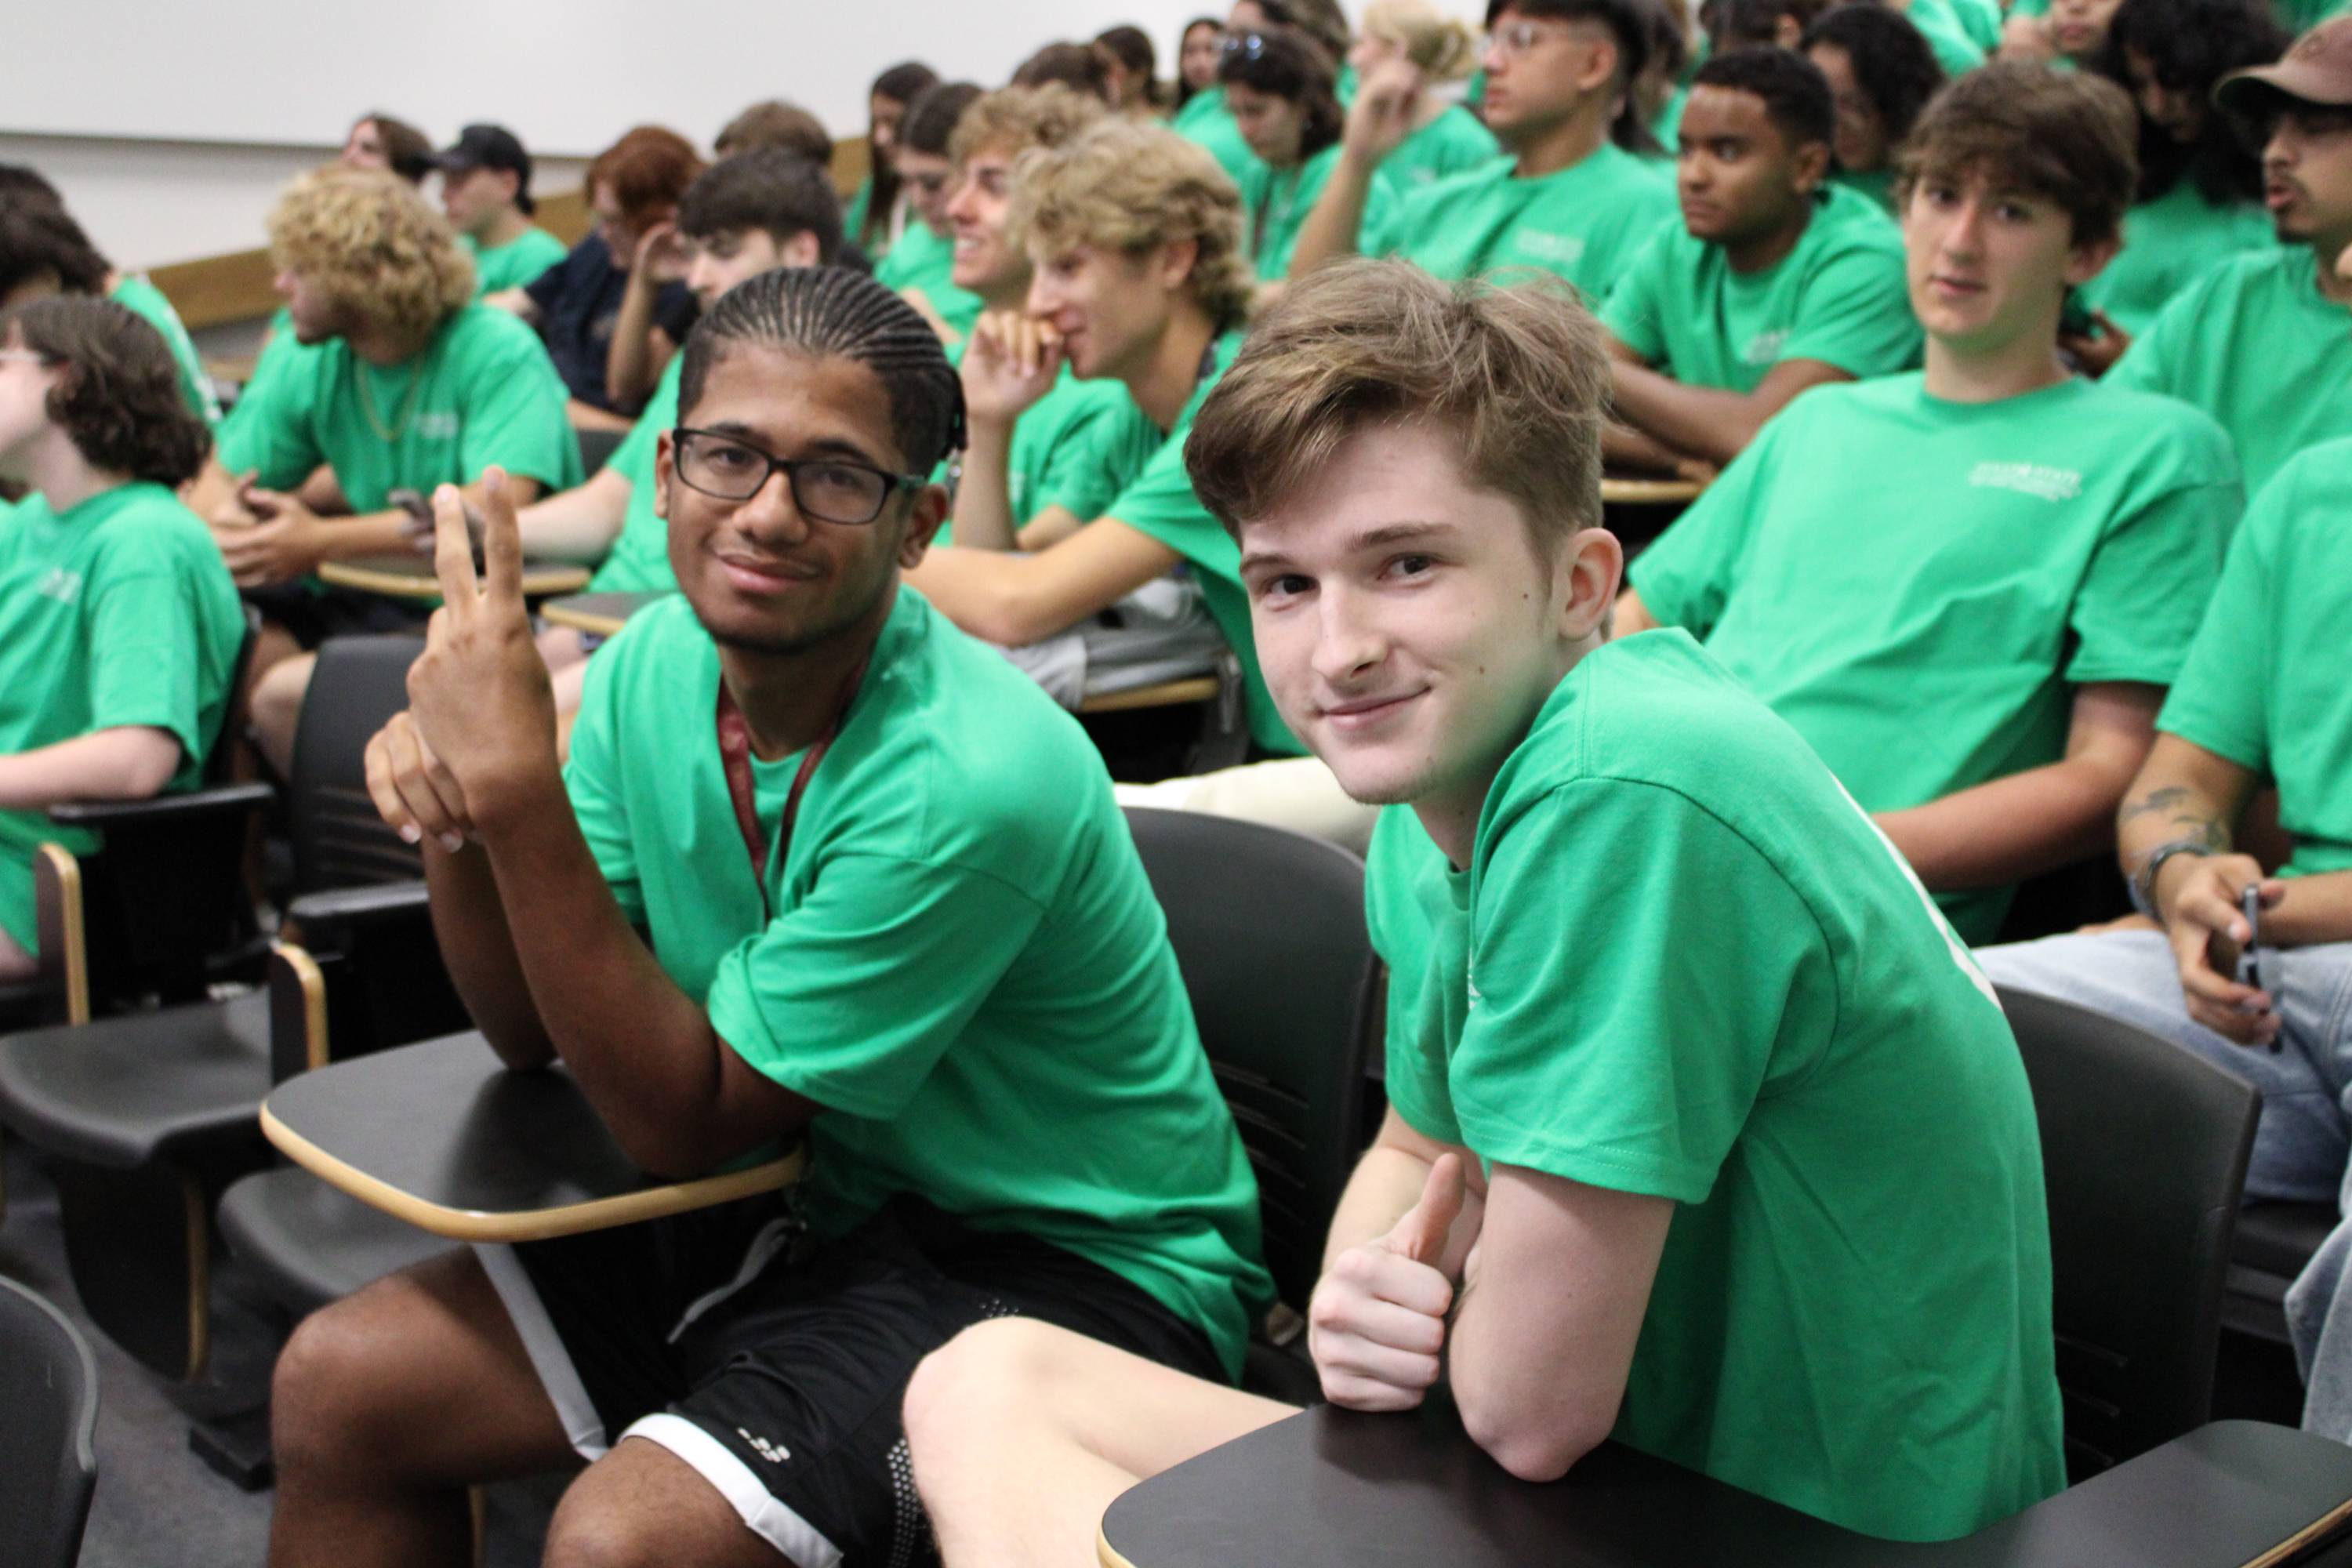 Two business LLC students in matching green shirts